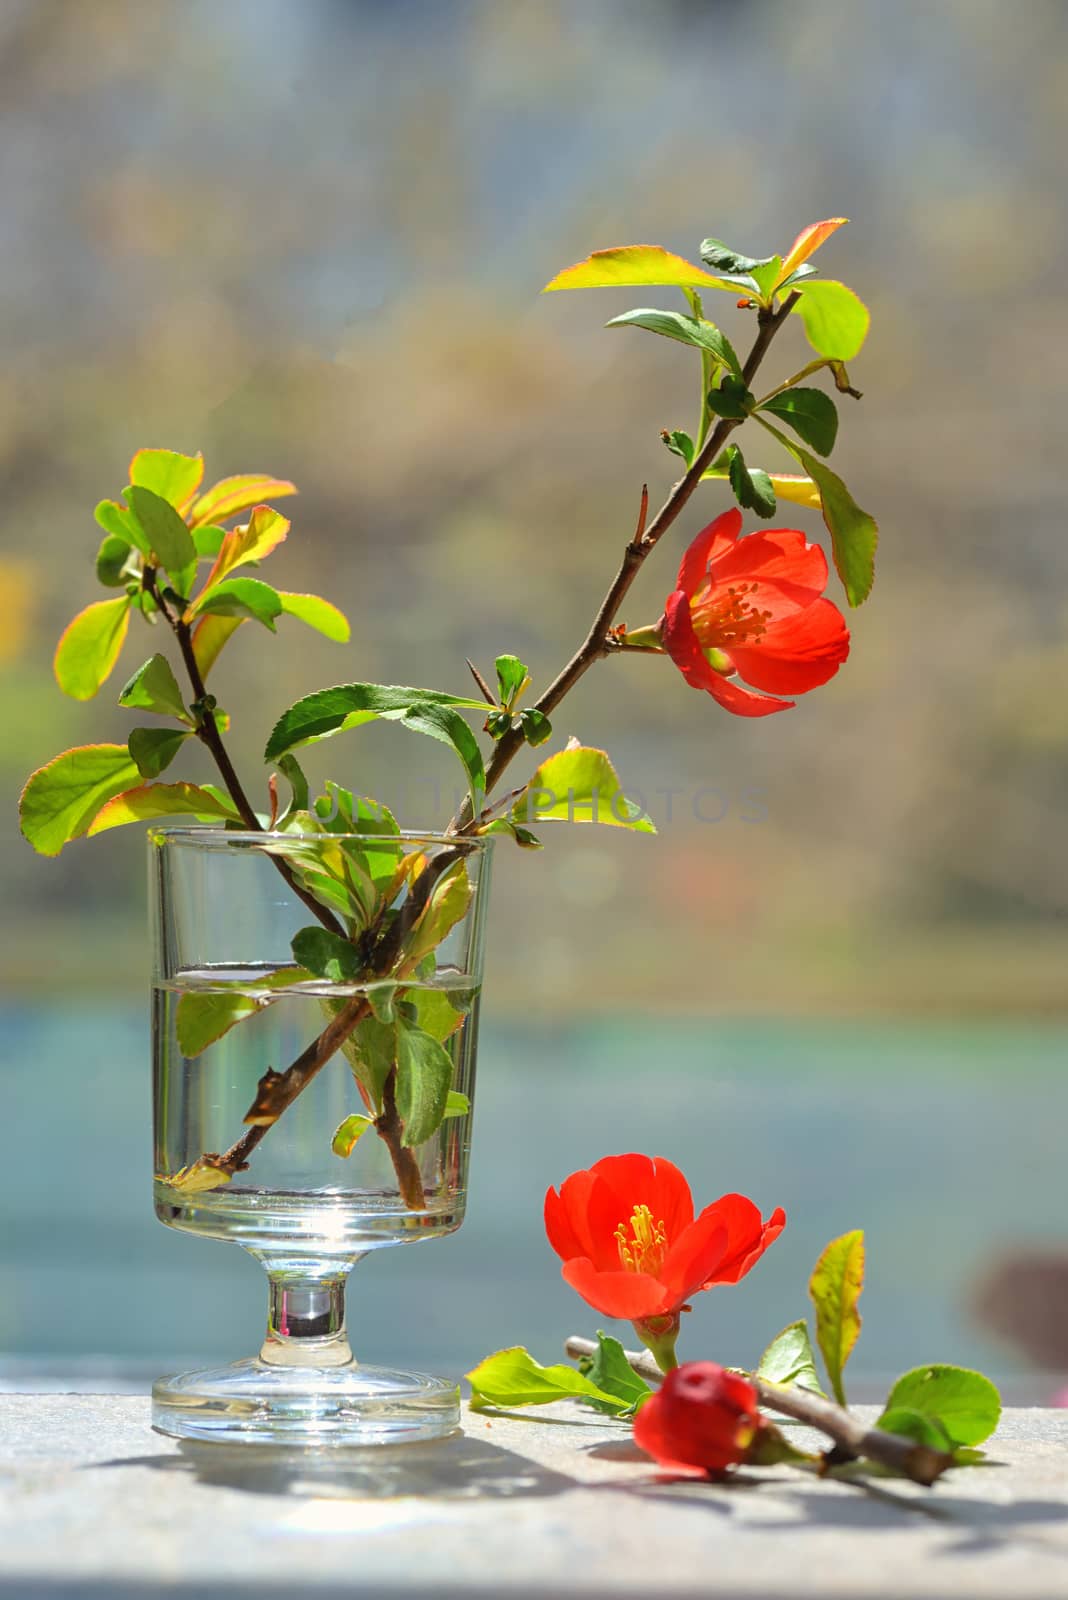 Japanese ornamental quince - Chaenomeles japonica by mady70